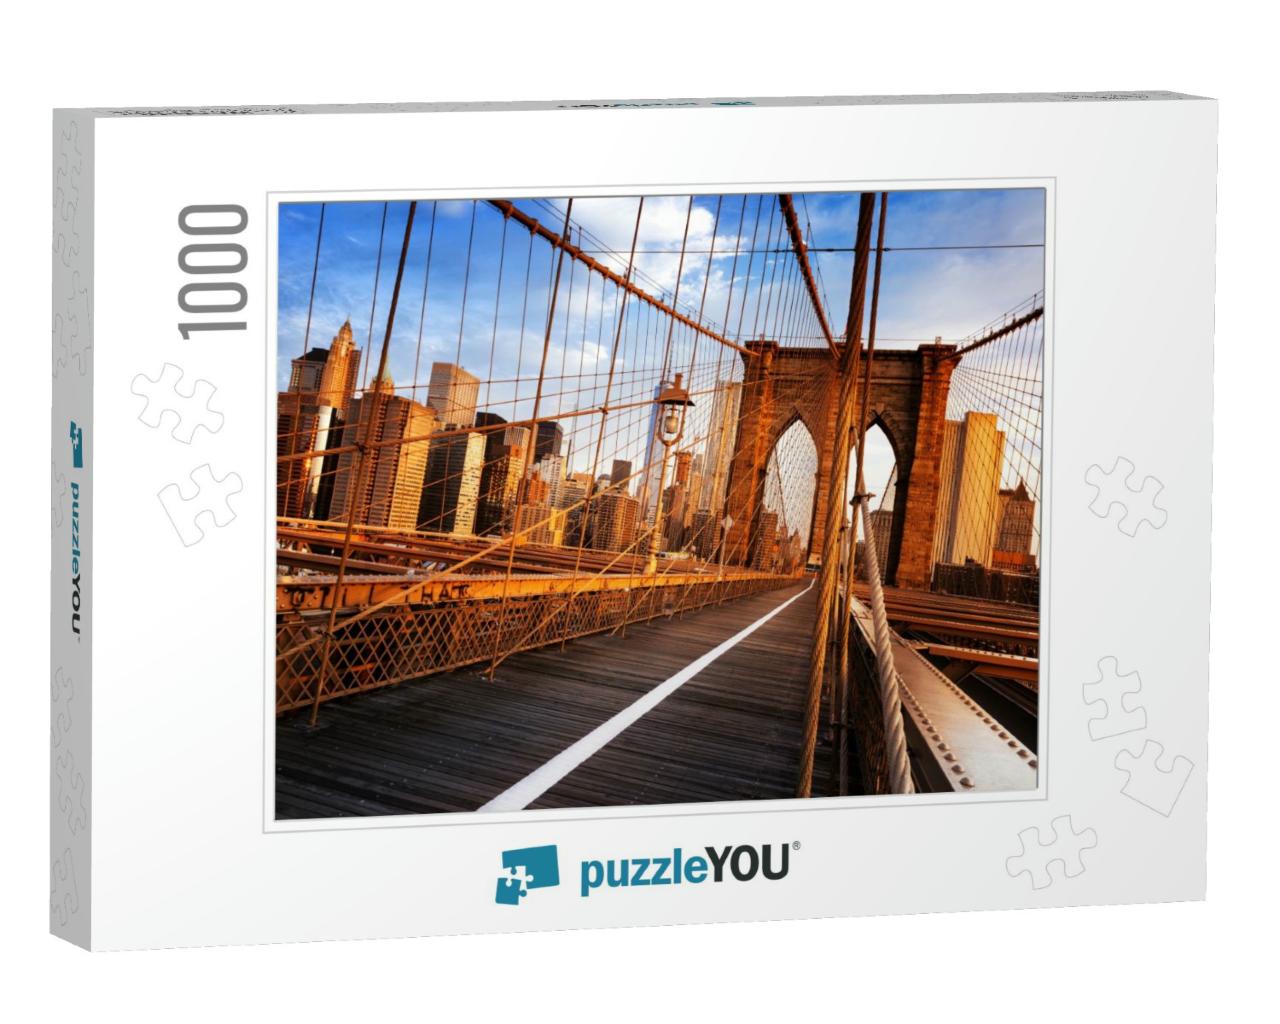 New York City, Usa, Early in the Morning on the Famous Br... Jigsaw Puzzle with 1000 pieces